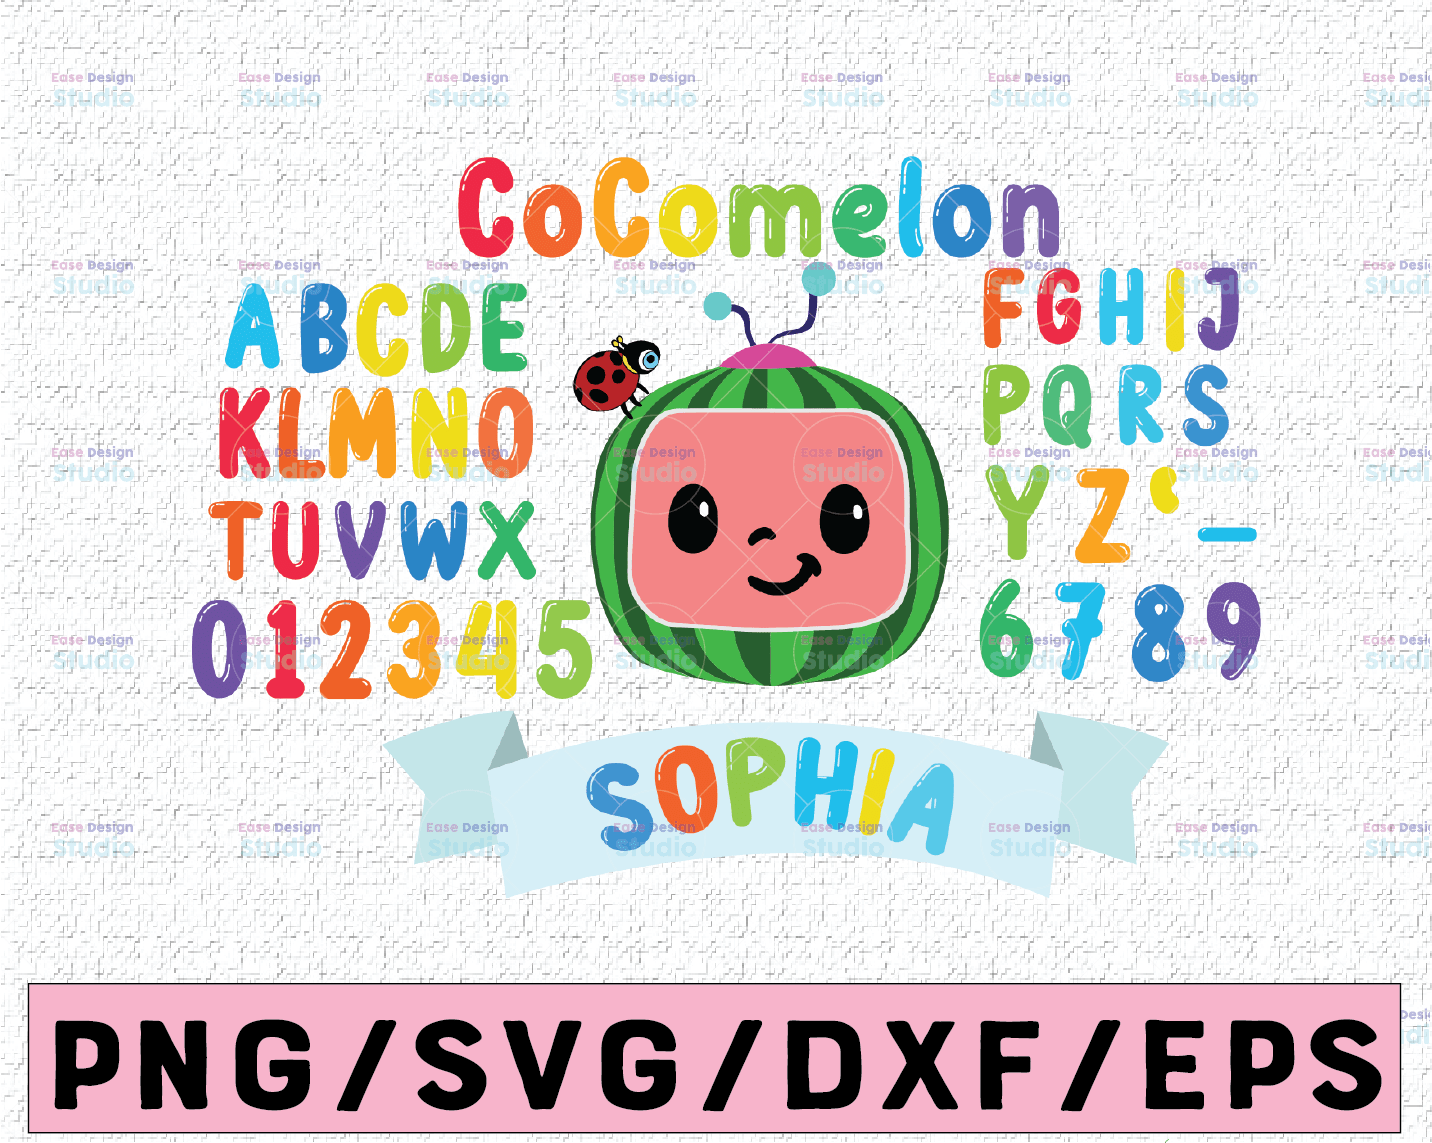 Download Cocomelon Logo And Full Alphabets Birthday Svg Png Cocomelon Birthday Svg Png Cocomelon Family Birthday Png Watermelon Svg Vectorency